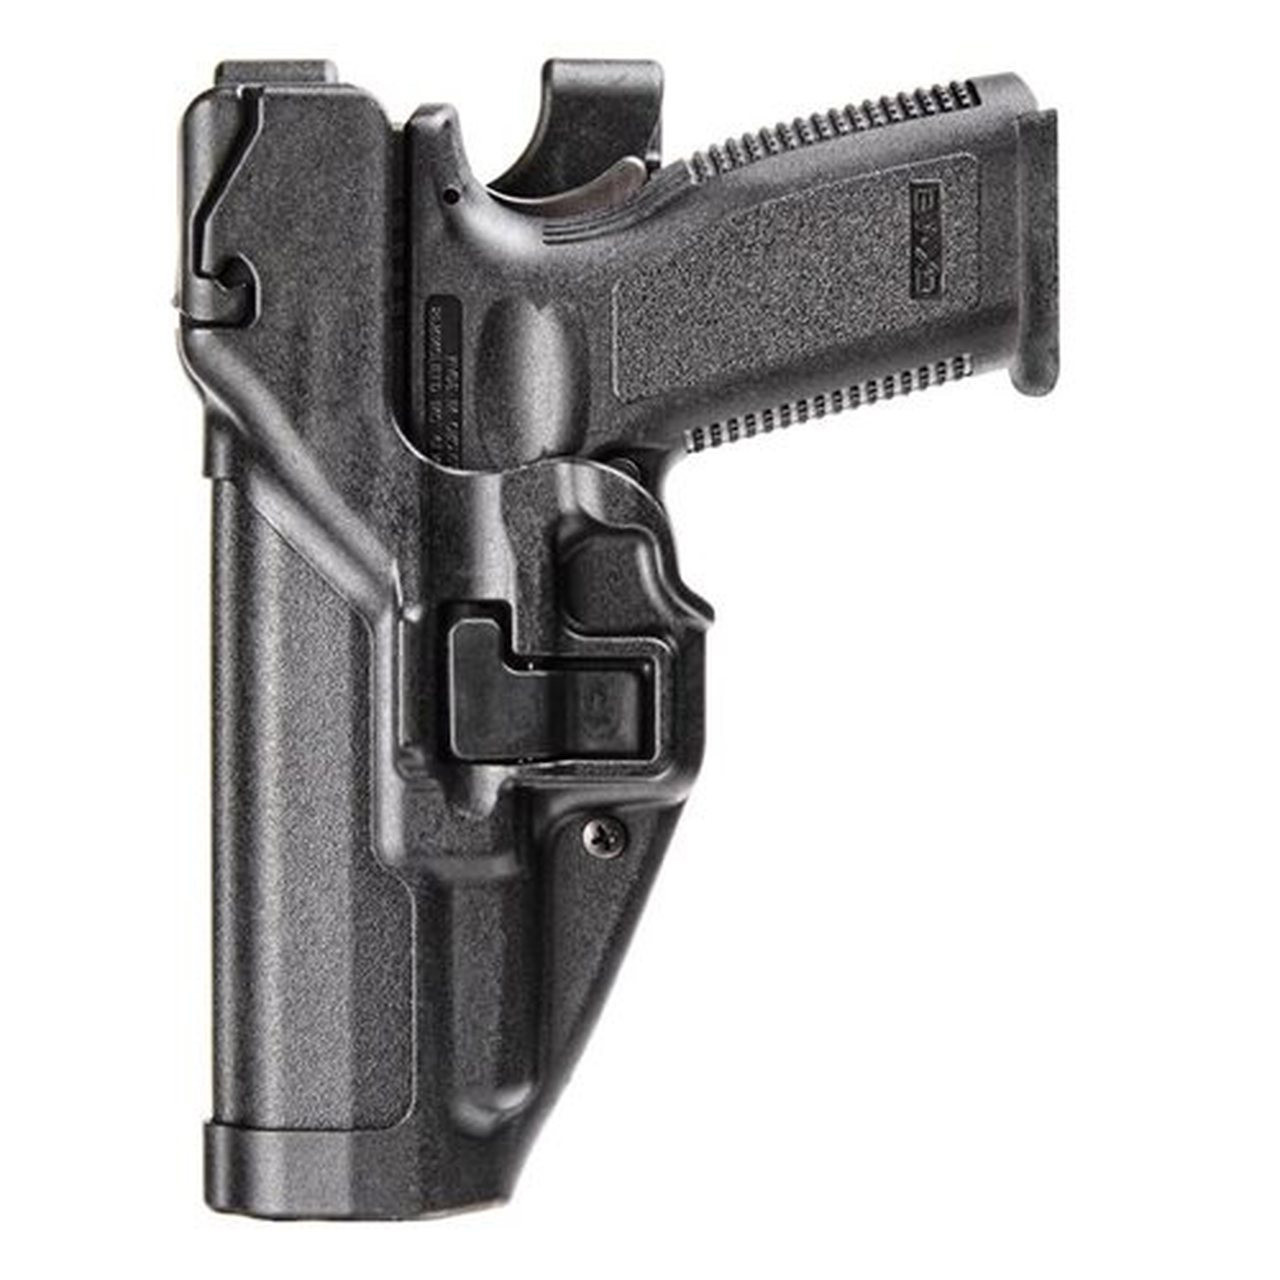 BLACKHAWK SERPA® LEVEL 3 DUTY HOLSTER, FEATURING AUTO-LOCK™ TECHNOLOGY,  Full-length holster body protects rear sights, Includes innovative Jacket  Slot Duty Belt Loop, 44H1